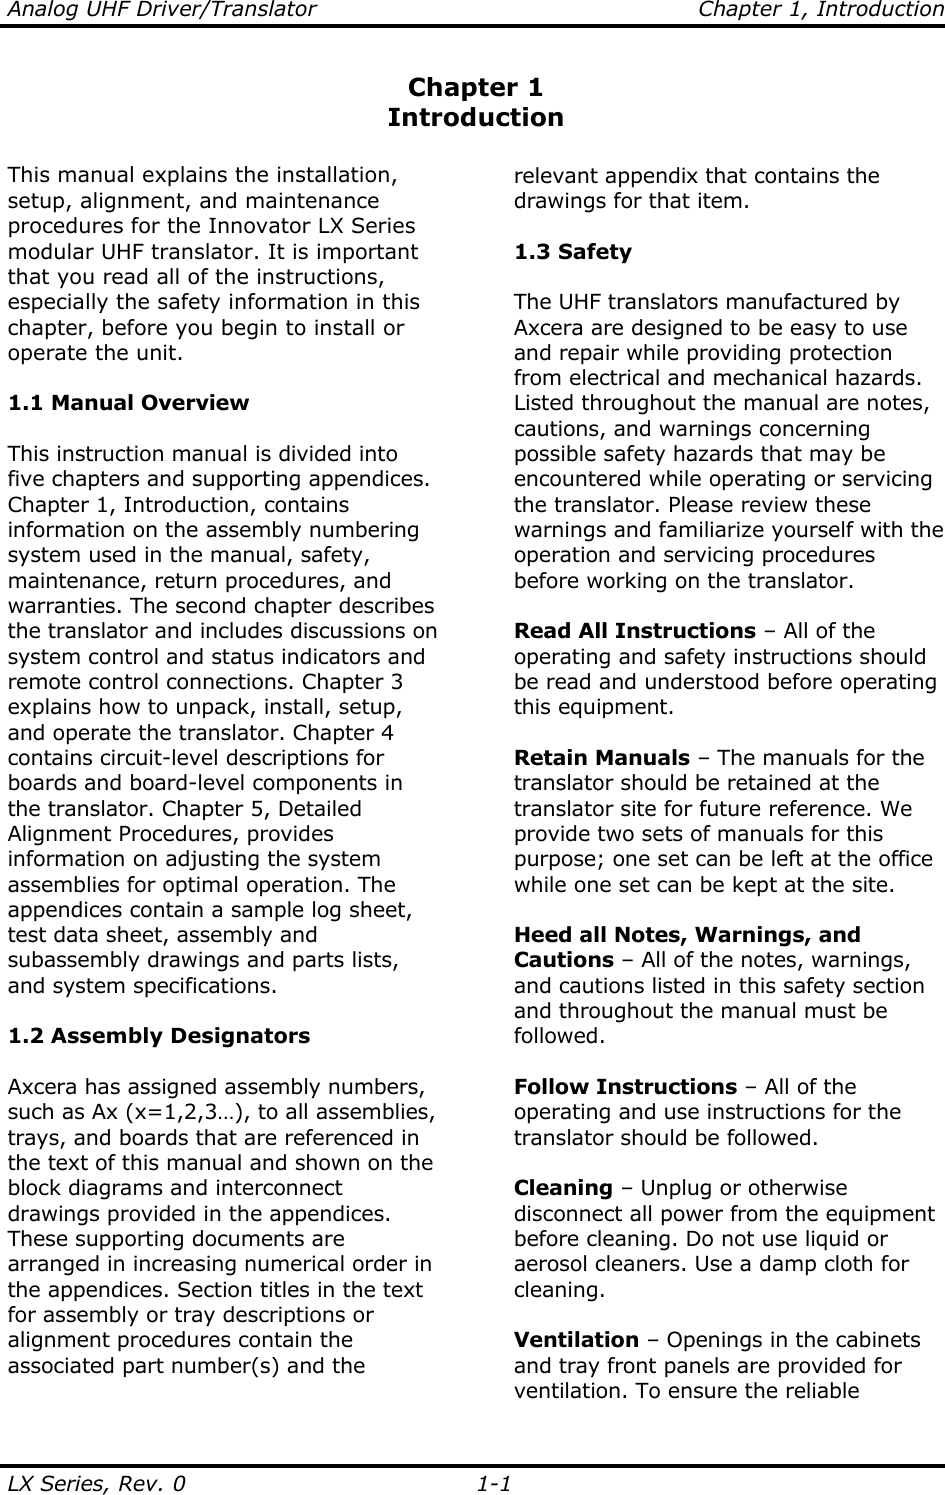 Analog UHF Driver/Translator    Chapter 1, Introduction LX Series, Rev. 0    1-1 Chapter 1 Introduction  This manual explains the installation, setup, alignment, and maintenance procedures for the Innovator LX Series modular UHF translator. It is important that you read all of the instructions, especially the safety information in this chapter, before you begin to install or operate the unit.  1.1 Manual Overview  This instruction manual is divided into five chapters and supporting appendices. Chapter 1, Introduction, contains information on the assembly numbering system used in the manual, safety, maintenance, return procedures, and warranties. The second chapter describes the translator and includes discussions on system control and status indicators and remote control connections. Chapter 3 explains how to unpack, install, setup, and operate the translator. Chapter 4 contains circuit-level descriptions for boards and board-level components in the translator. Chapter 5, Detailed Alignment Procedures, provides information on adjusting the system assemblies for optimal operation. The appendices contain a sample log sheet, test data sheet, assembly and subassembly drawings and parts lists, and system specifications.  1.2 Assembly Designators  Axcera has assigned assembly numbers, such as Ax (x=1,2,3…), to all assemblies, trays, and boards that are referenced in the text of this manual and shown on the block diagrams and interconnect drawings provided in the appendices. These supporting documents are arranged in increasing numerical order in the appendices. Section titles in the text for assembly or tray descriptions or alignment procedures contain the associated part number(s) and the relevant appendix that contains the drawings for that item.   1.3 Safety  The UHF translators manufactured by Axcera are designed to be easy to use and repair while providing protection from electrical and mechanical hazards. Listed throughout the manual are notes, cautions, and warnings concerning possible safety hazards that may be encountered while operating or servicing the translator. Please review these warnings and familiarize yourself with the operation and servicing procedures before working on the translator.  Read All Instructions – All of the operating and safety instructions should be read and understood before operating this equipment.  Retain Manuals – The manuals for the translator should be retained at the translator site for future reference. We provide two sets of manuals for this purpose; one set can be left at the office while one set can be kept at the site.  Heed all Notes, Warnings, and Cautions – All of the notes, warnings, and cautions listed in this safety section and throughout the manual must be followed.  Follow Instructions – All of the operating and use instructions for the translator should be followed.  Cleaning – Unplug or otherwise disconnect all power from the equipment before cleaning. Do not use liquid or aerosol cleaners. Use a damp cloth for cleaning.  Ventilation – Openings in the cabinets and tray front panels are provided for ventilation. To ensure the reliable 